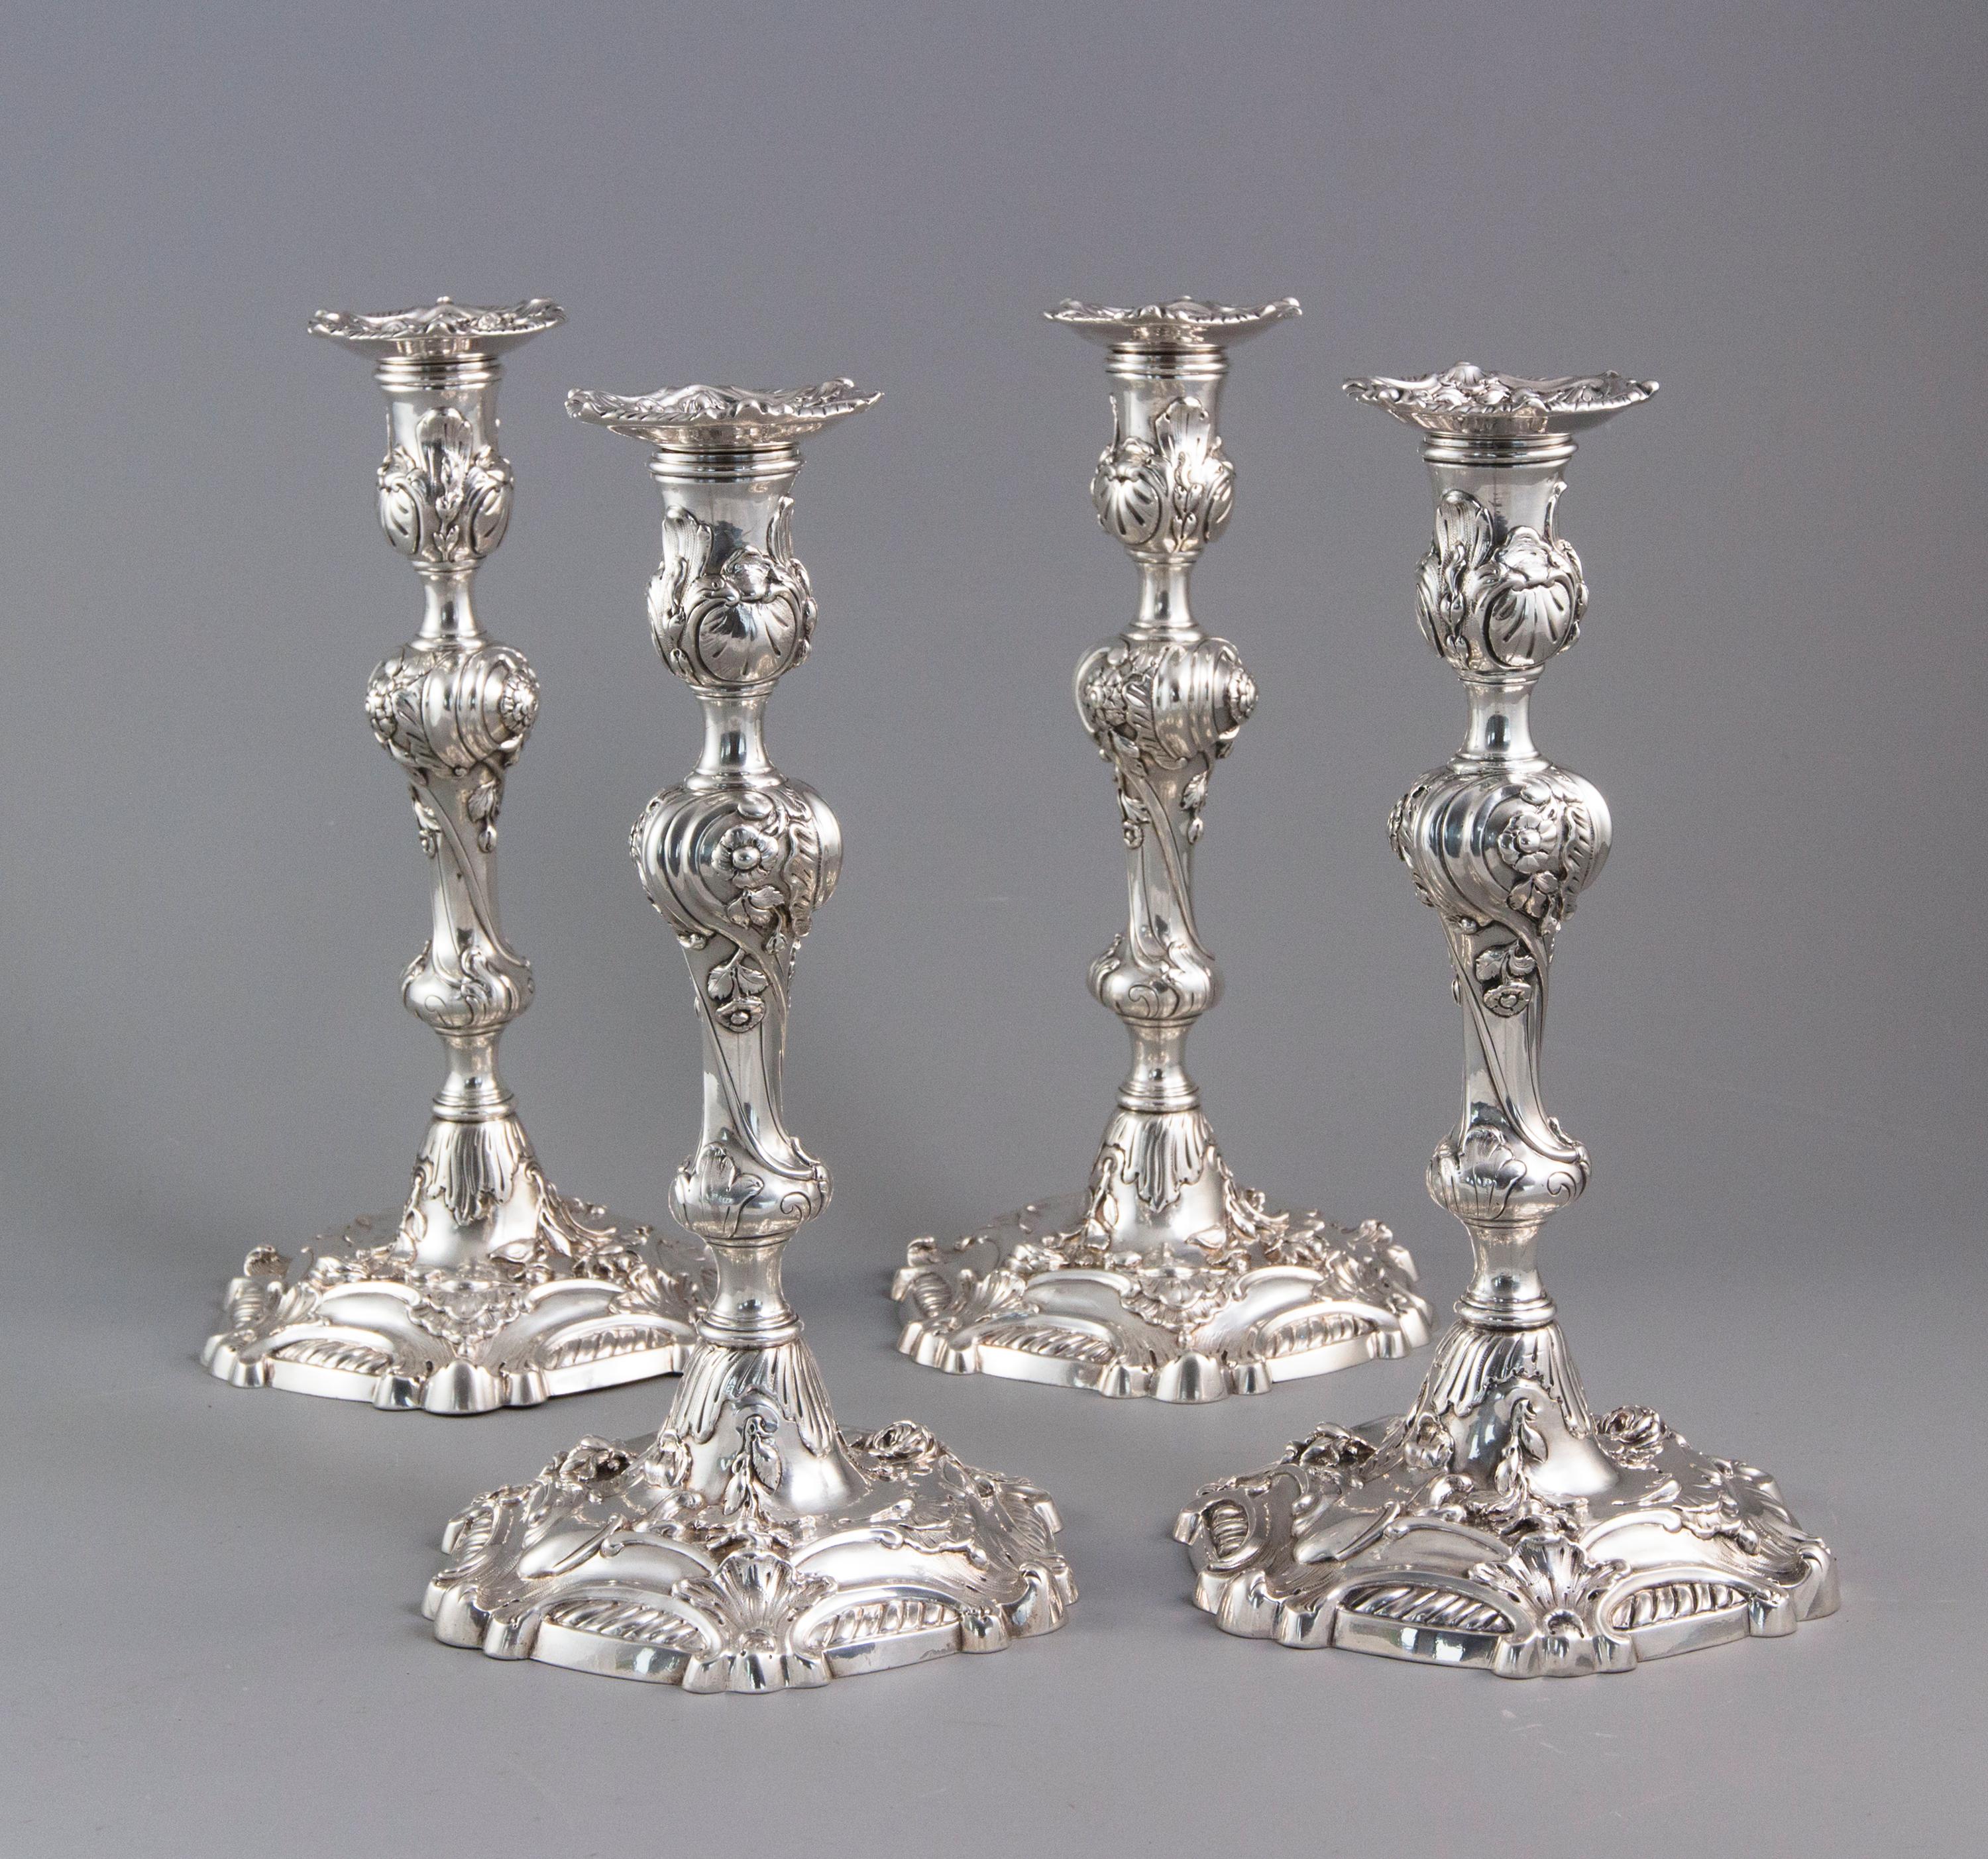 This beautiful set of four cast George II silver candlesticks are designed in the Rococo style and came from the personal collection of Yves Saint Laurent & Pierre Bergé.

Each with shaped, circular base with cast shell and floral decoration. The